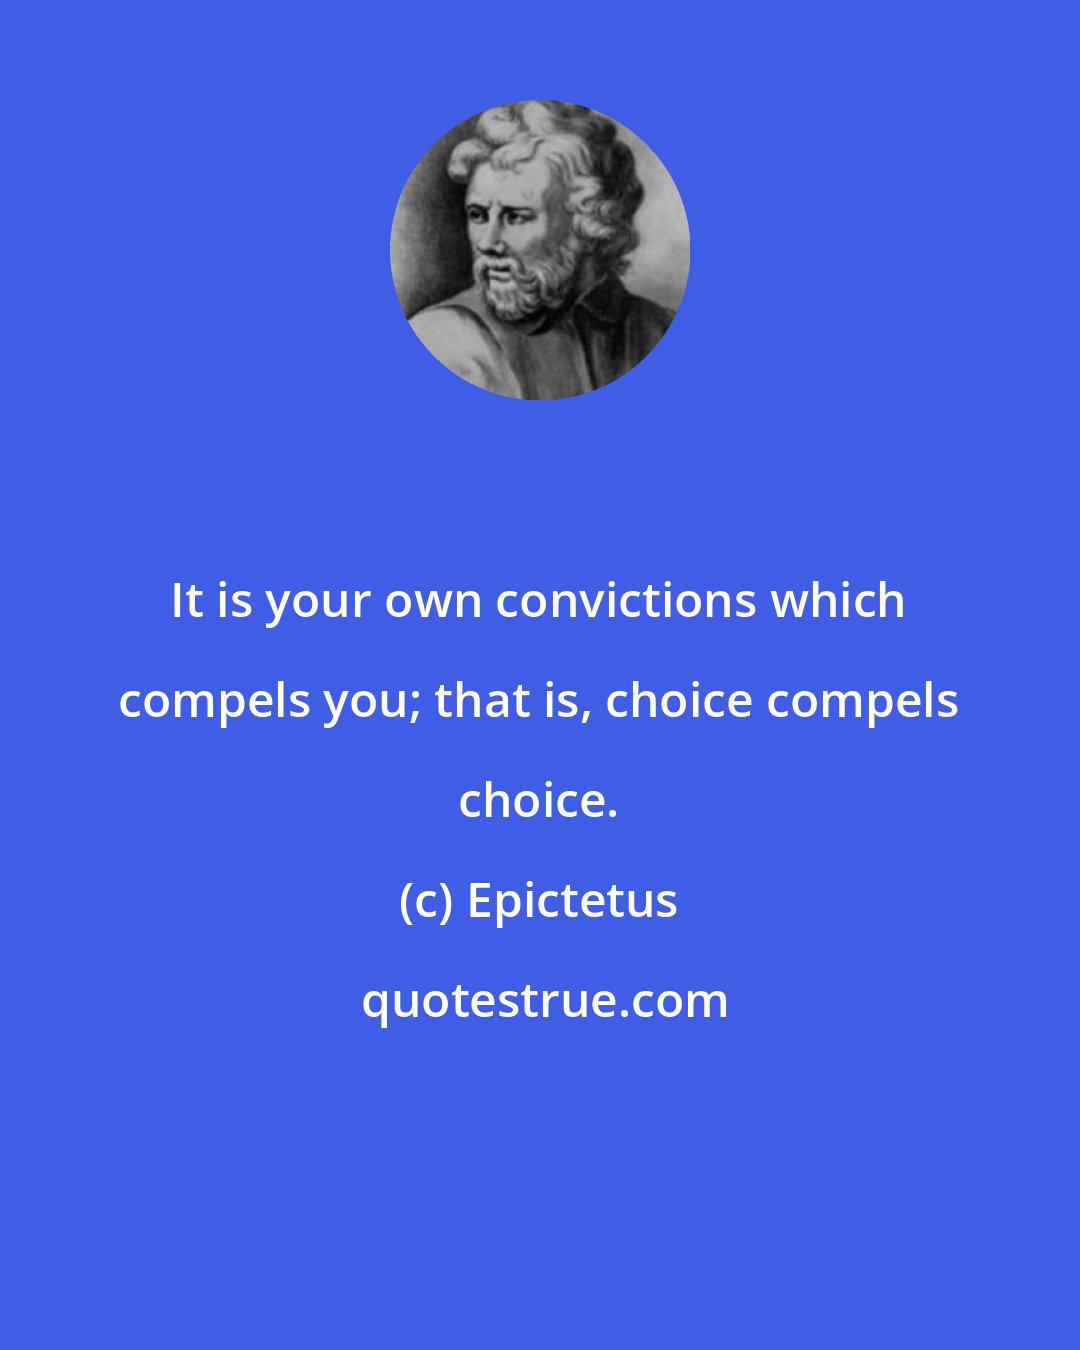 Epictetus: It is your own convictions which compels you; that is, choice compels choice.